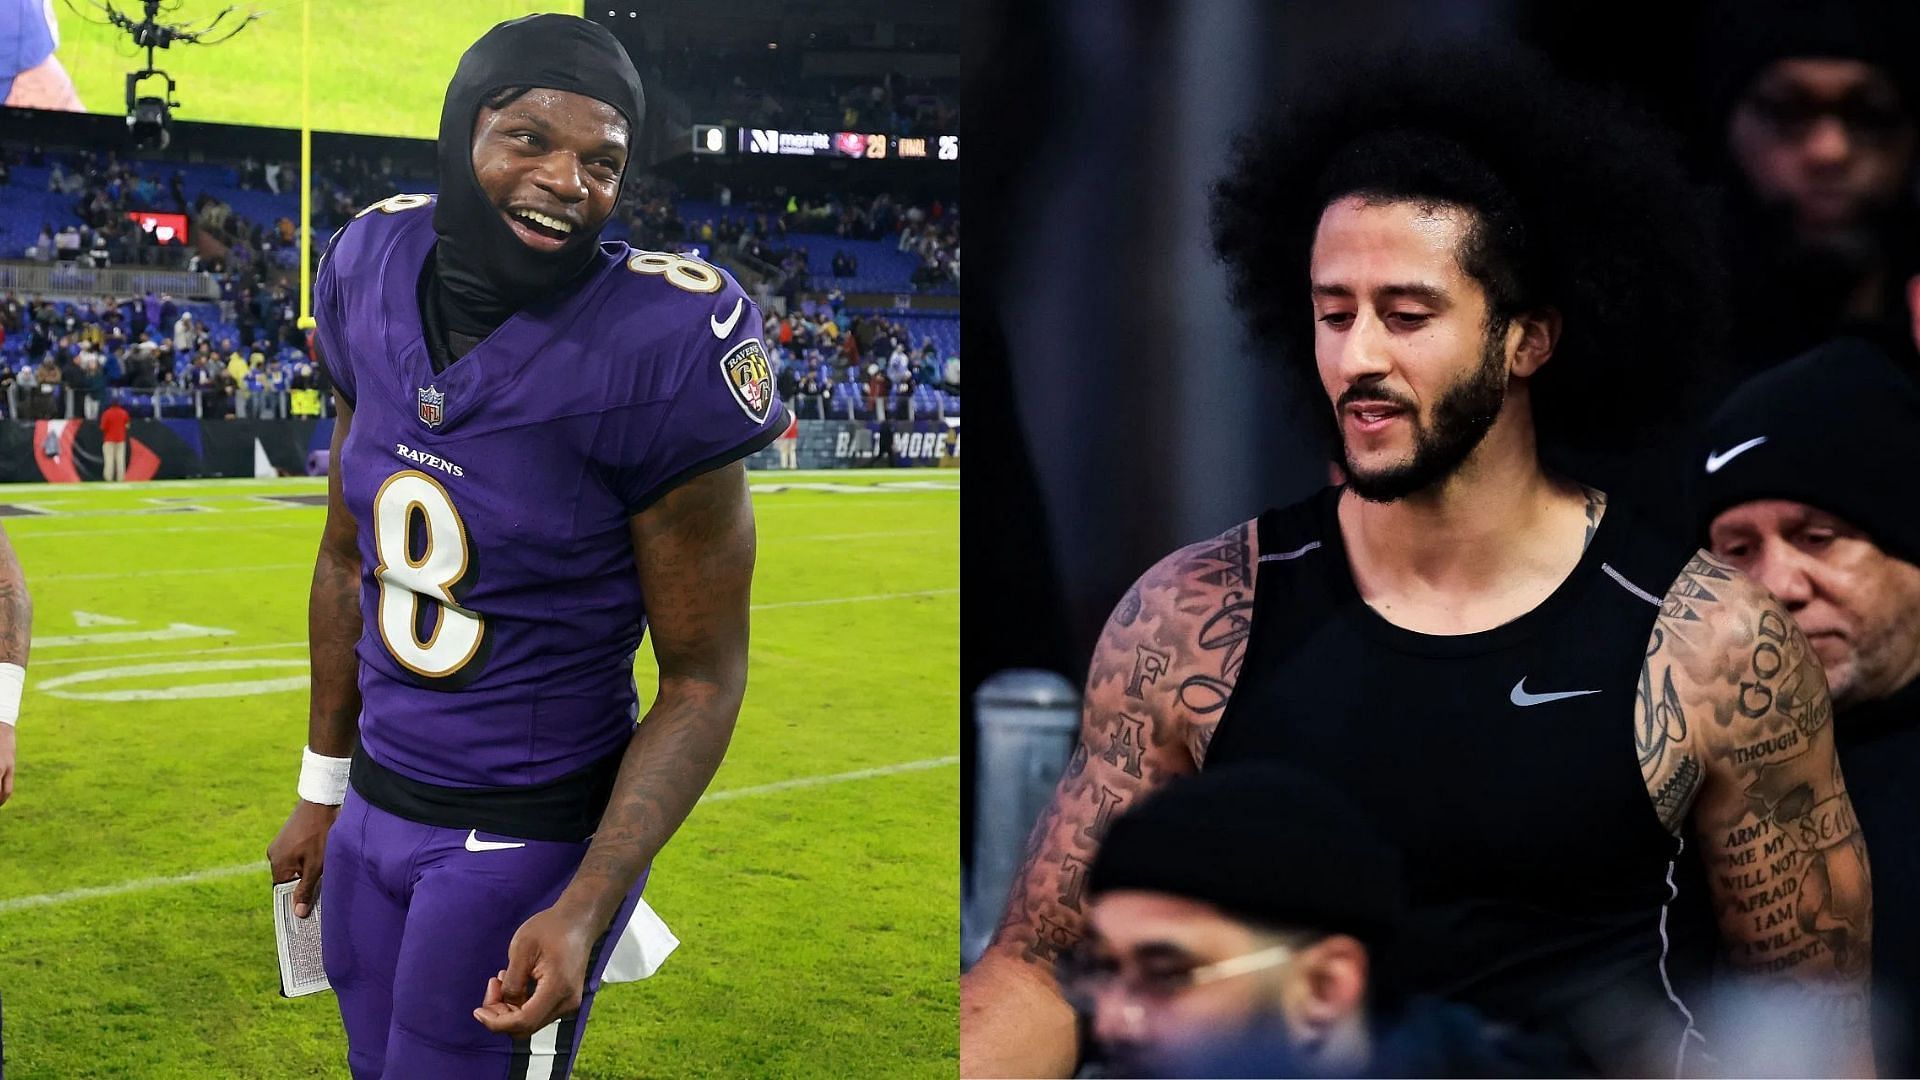 Mike Florio: Lamar Jackson channeled his inner Colin Kaepernick during contract negotiationc